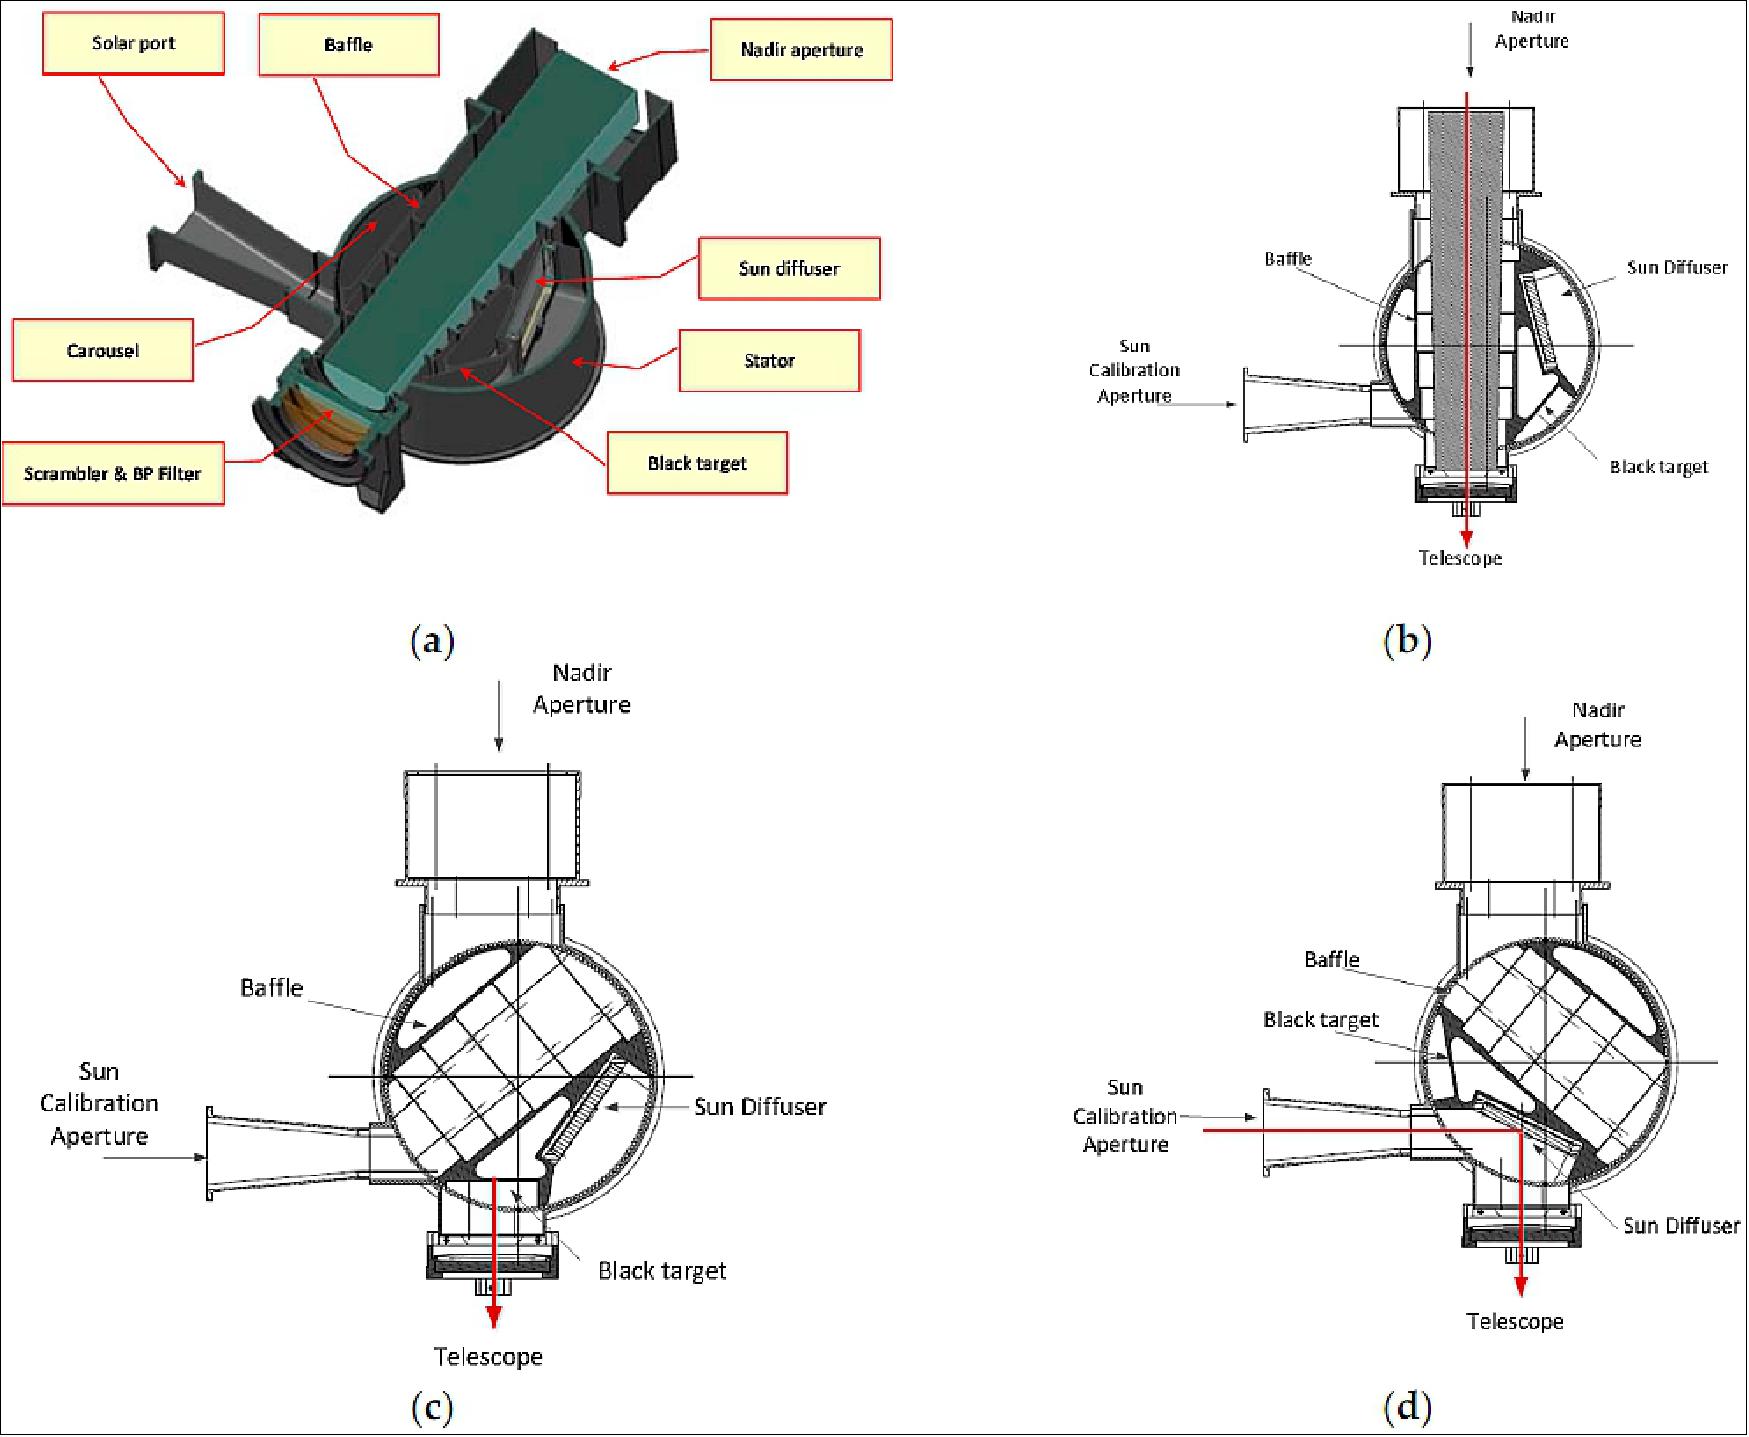 Figure 22: Rotating Calibration Unit internal view (a) and in three different positions: (b) Earth Nadir Observation, (c) Black target observation, (d) Sun diffuser observation through the solar port (image credit: FLEX collaboration)